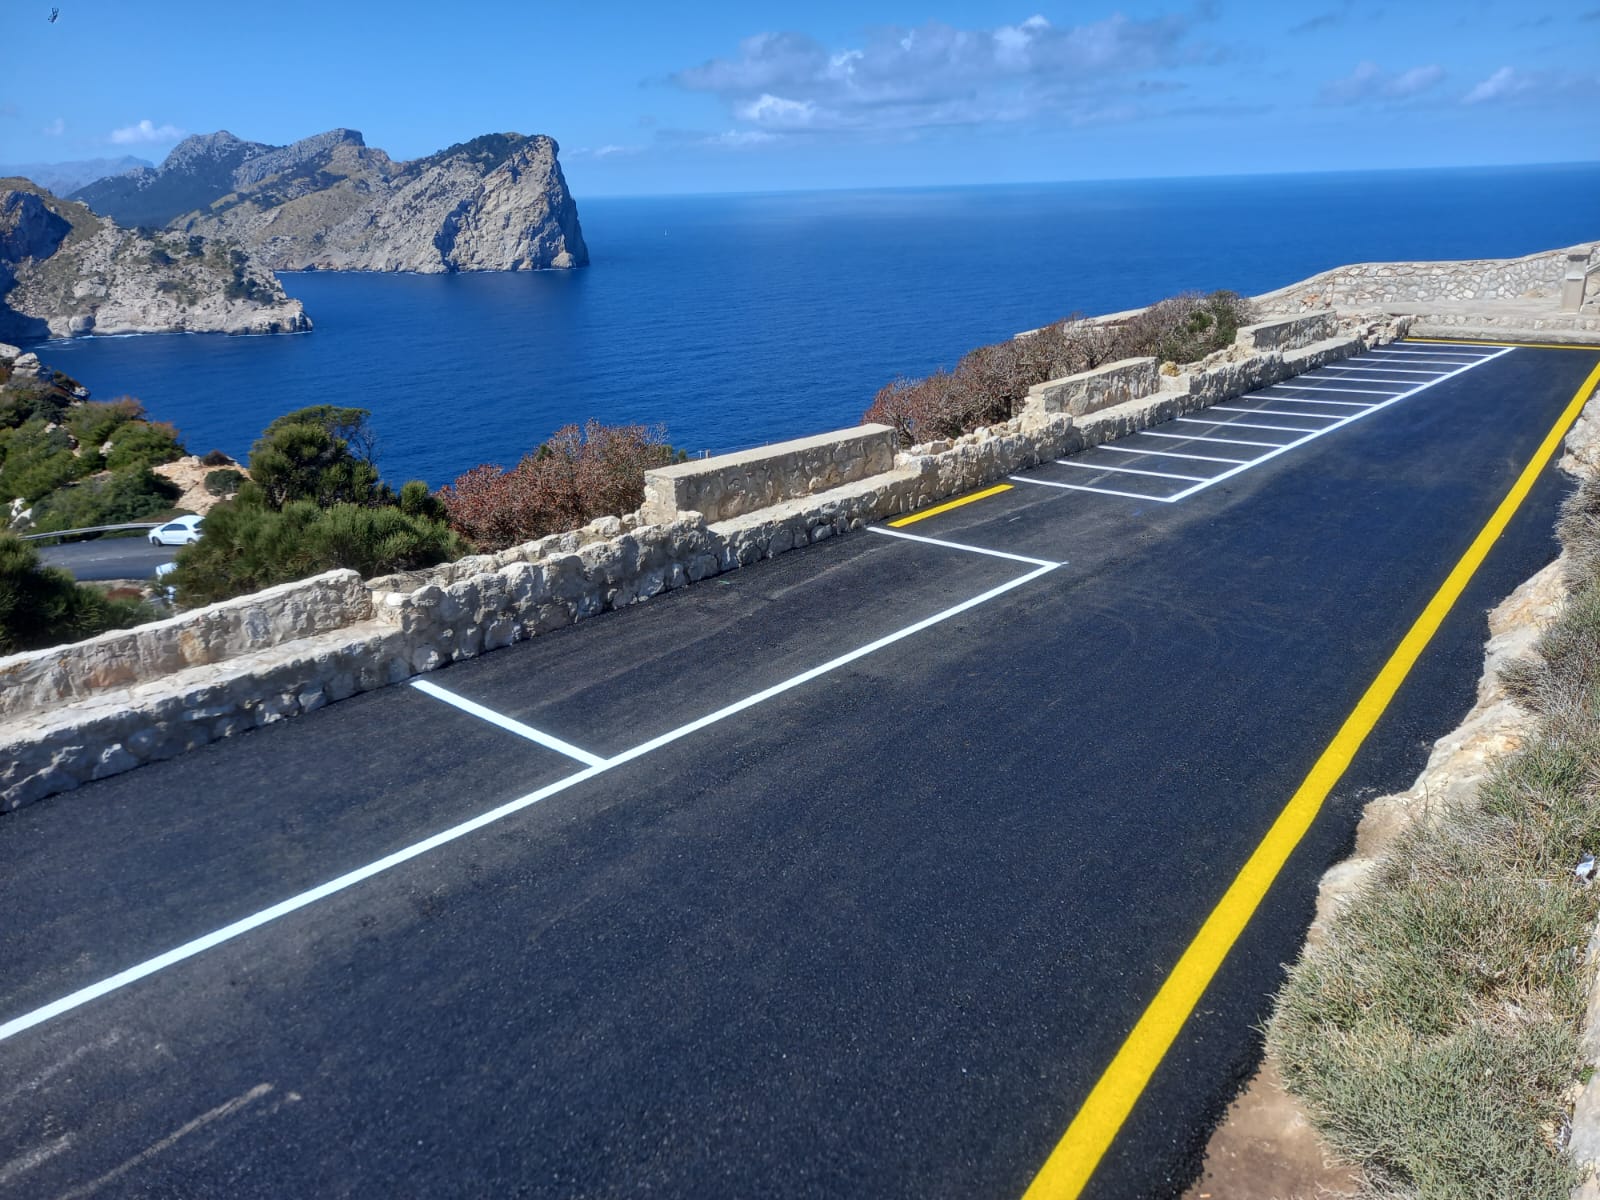 Work on the Formentor lighthouse road has been completed